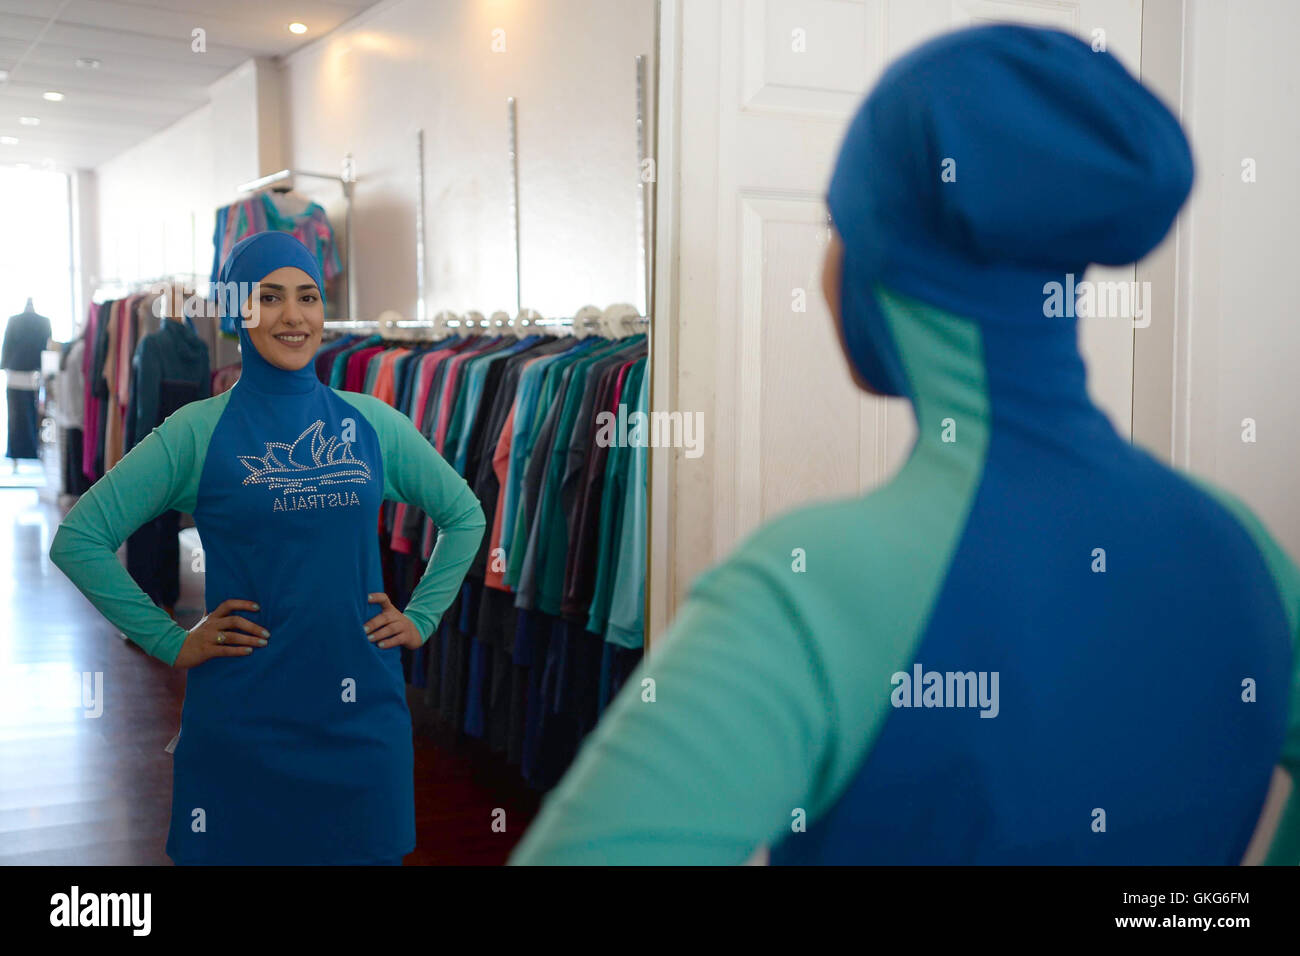 Sydney, Australia. 20th Aug, 2016. Salwa Elrashid, 23, a student from Western Sydney University poses at a boutique in Chester Hill in western Sydney, Australia 20.08.2016. The shop owner Aheda Zanetti invented the burqini in 2004. Photo: Subel Bhandari/dpa/Alamy Live News Stock Photo